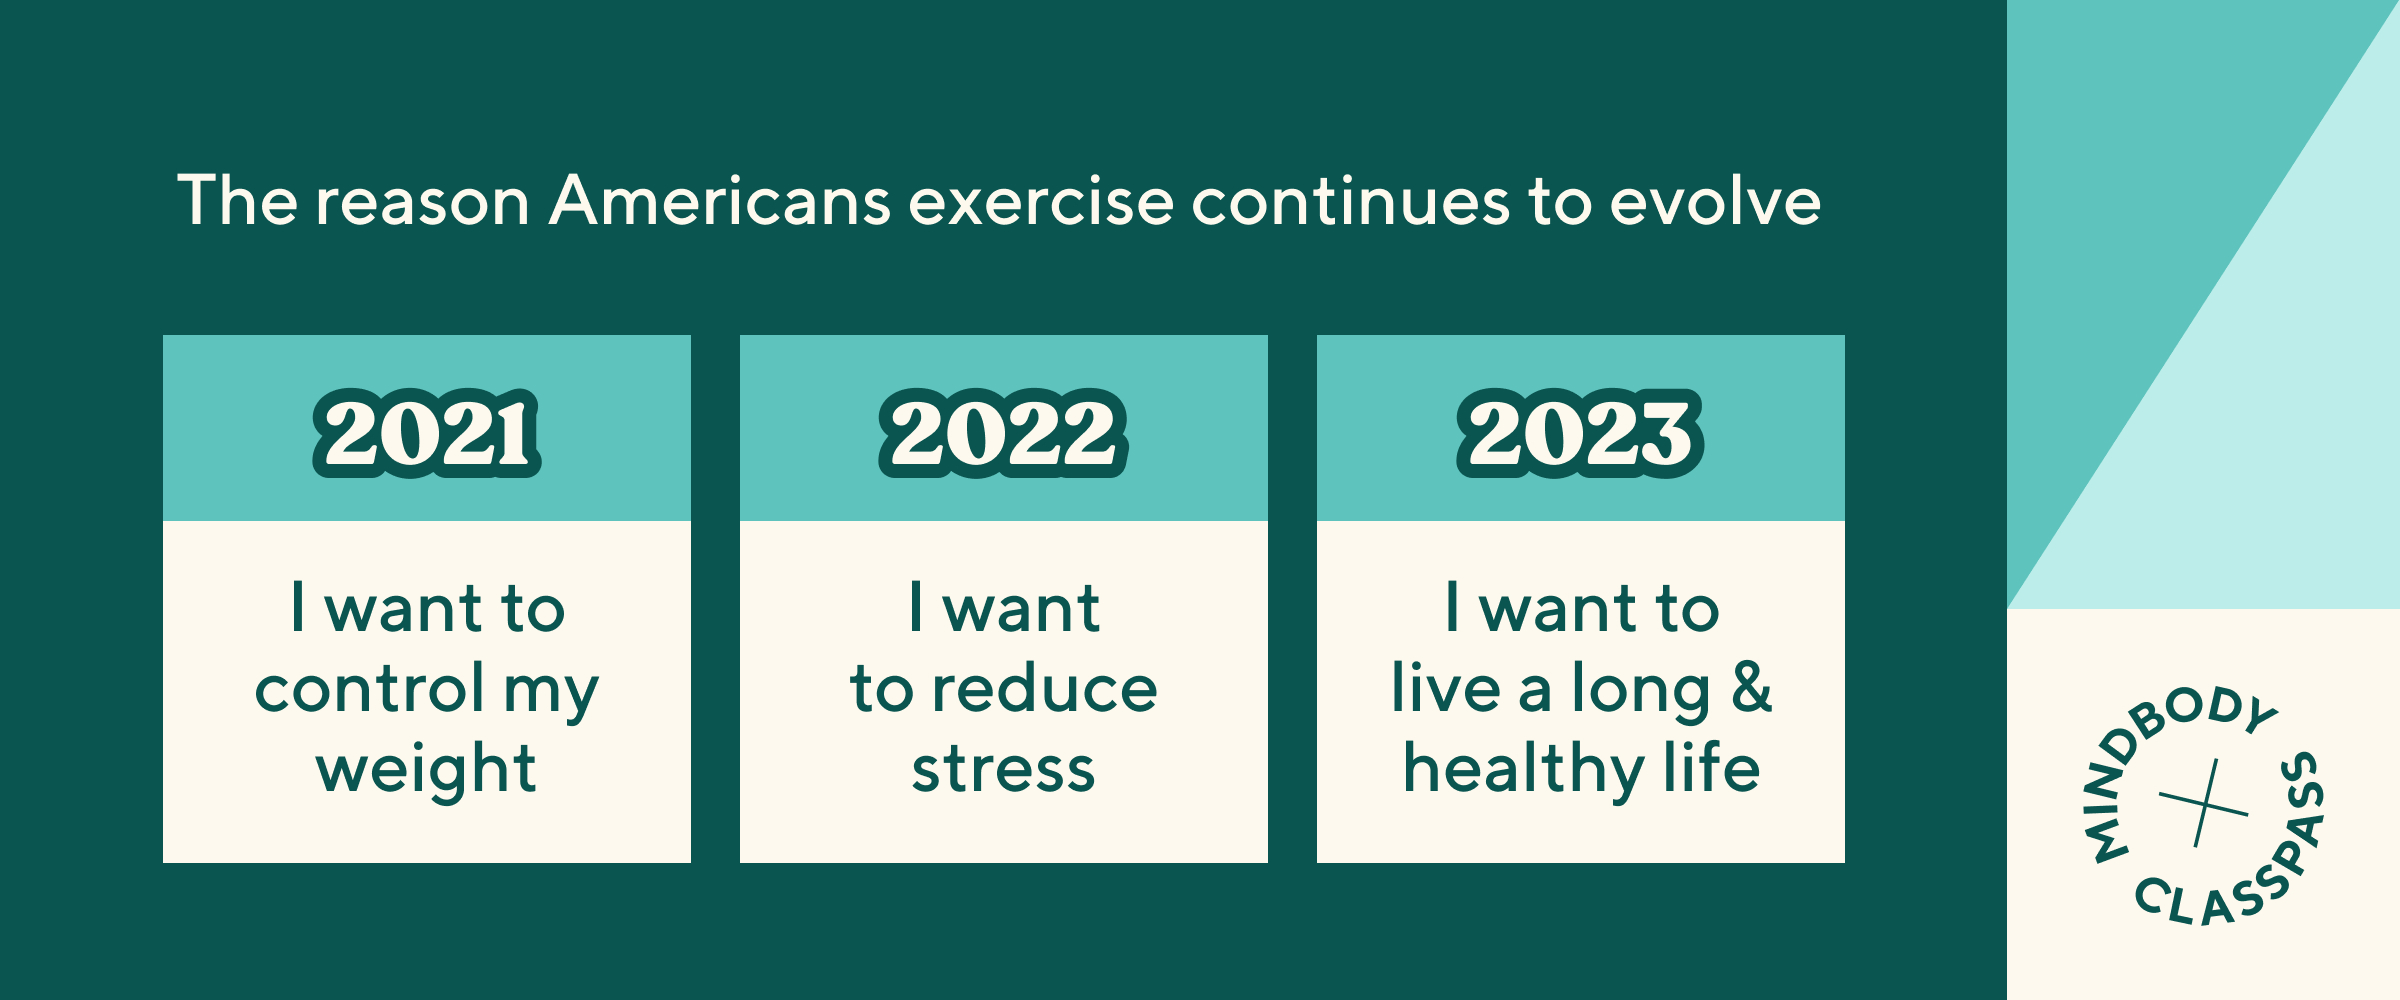 The reason Americans exercise continues to evolve